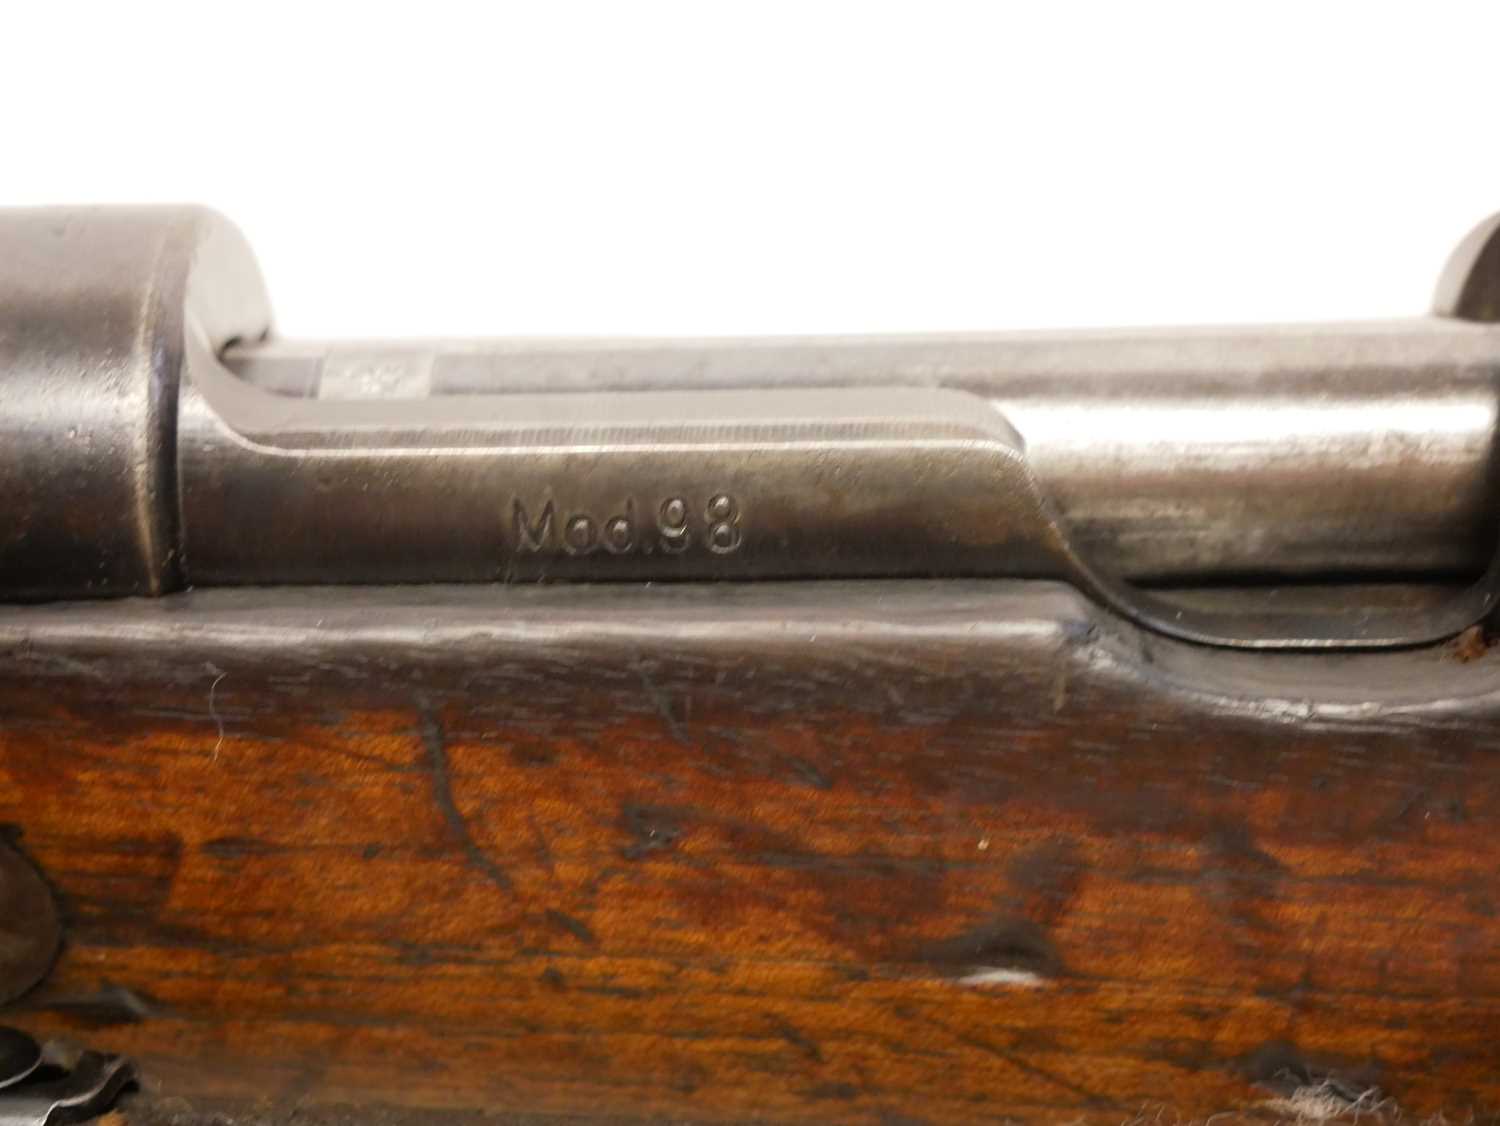 Deactivated WWII Waffenamt maked K98 7.92 bolt action rifle - Image 11 of 15